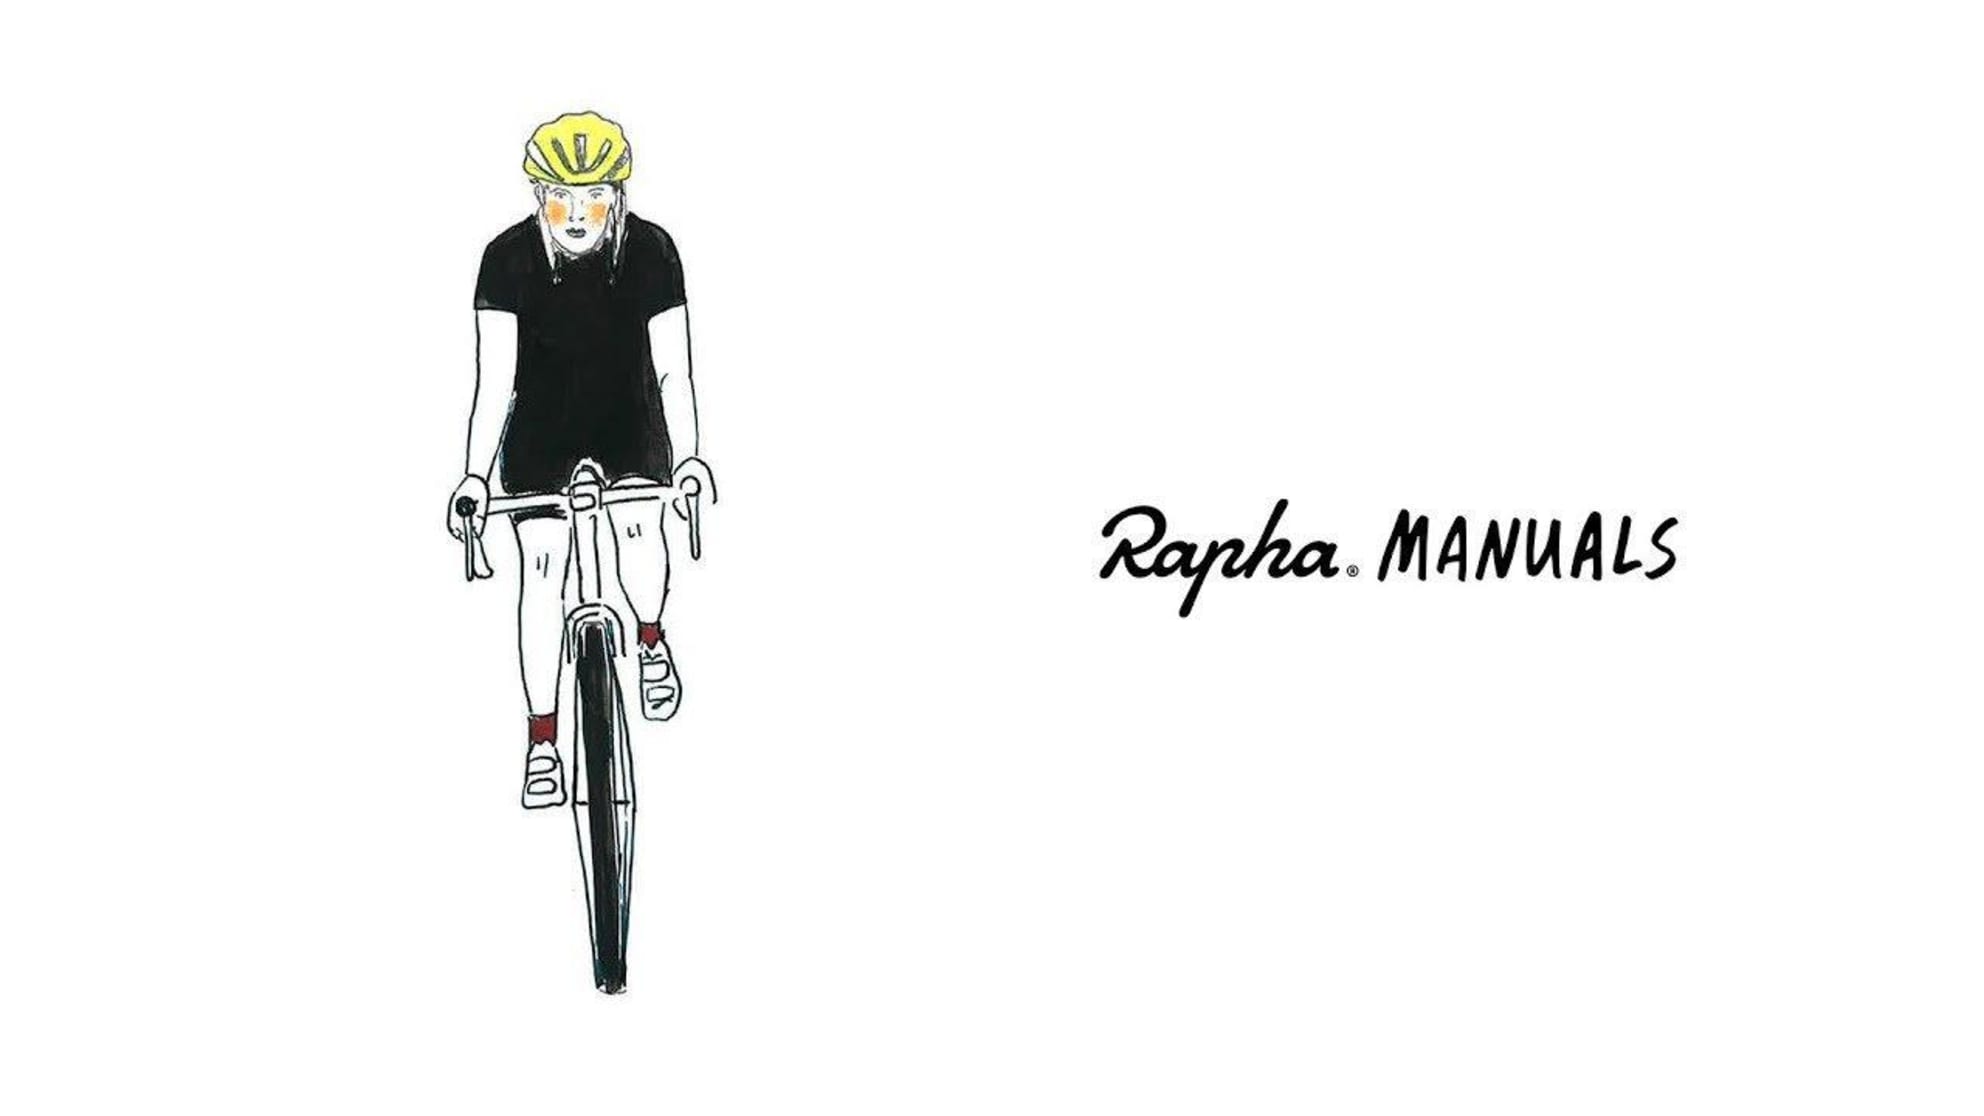 Rapha Manuals: Lost and Free